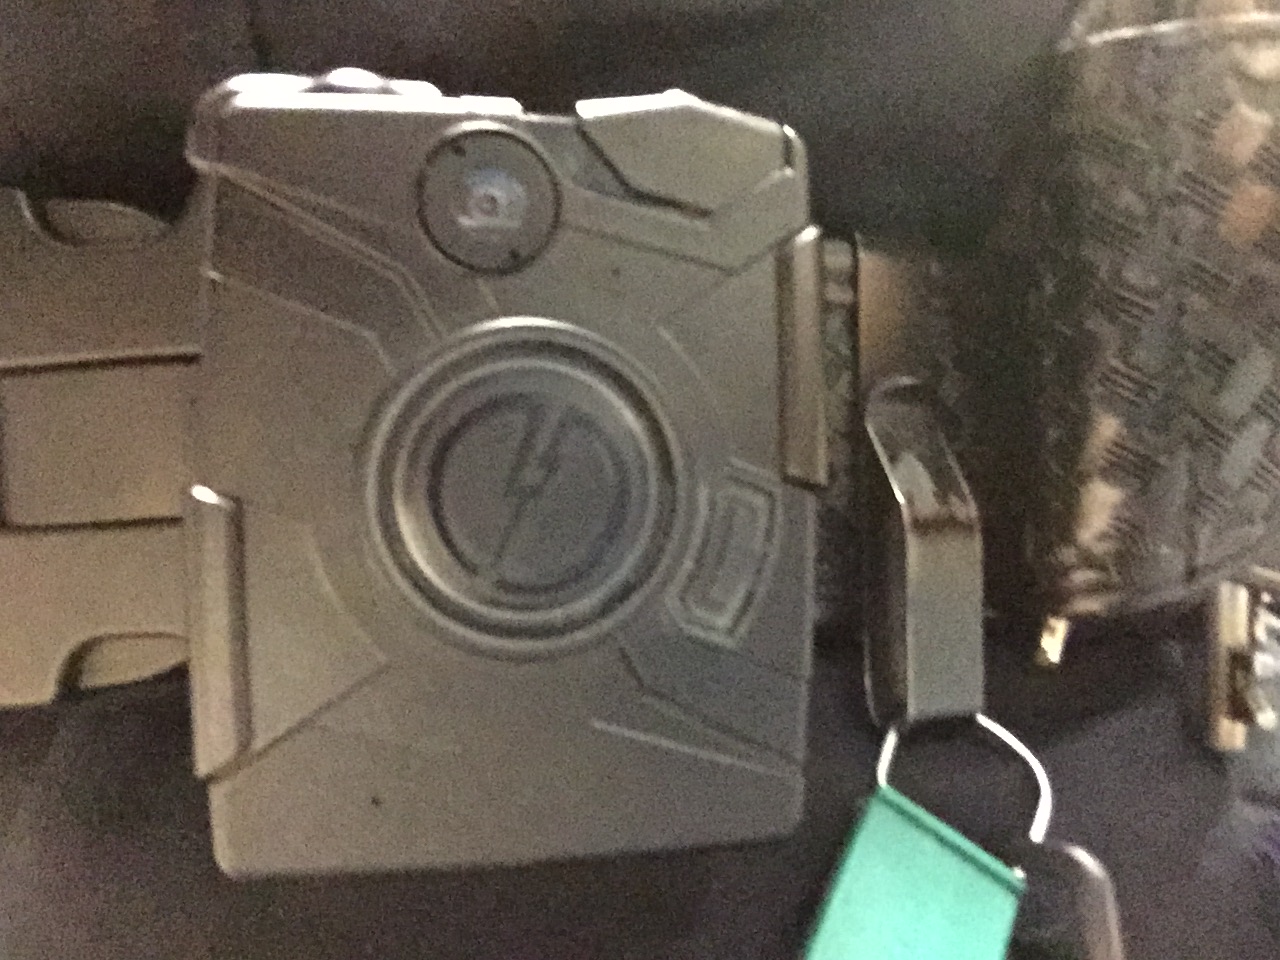 Are body cameras everything they're cracked up to be? - The Gateway